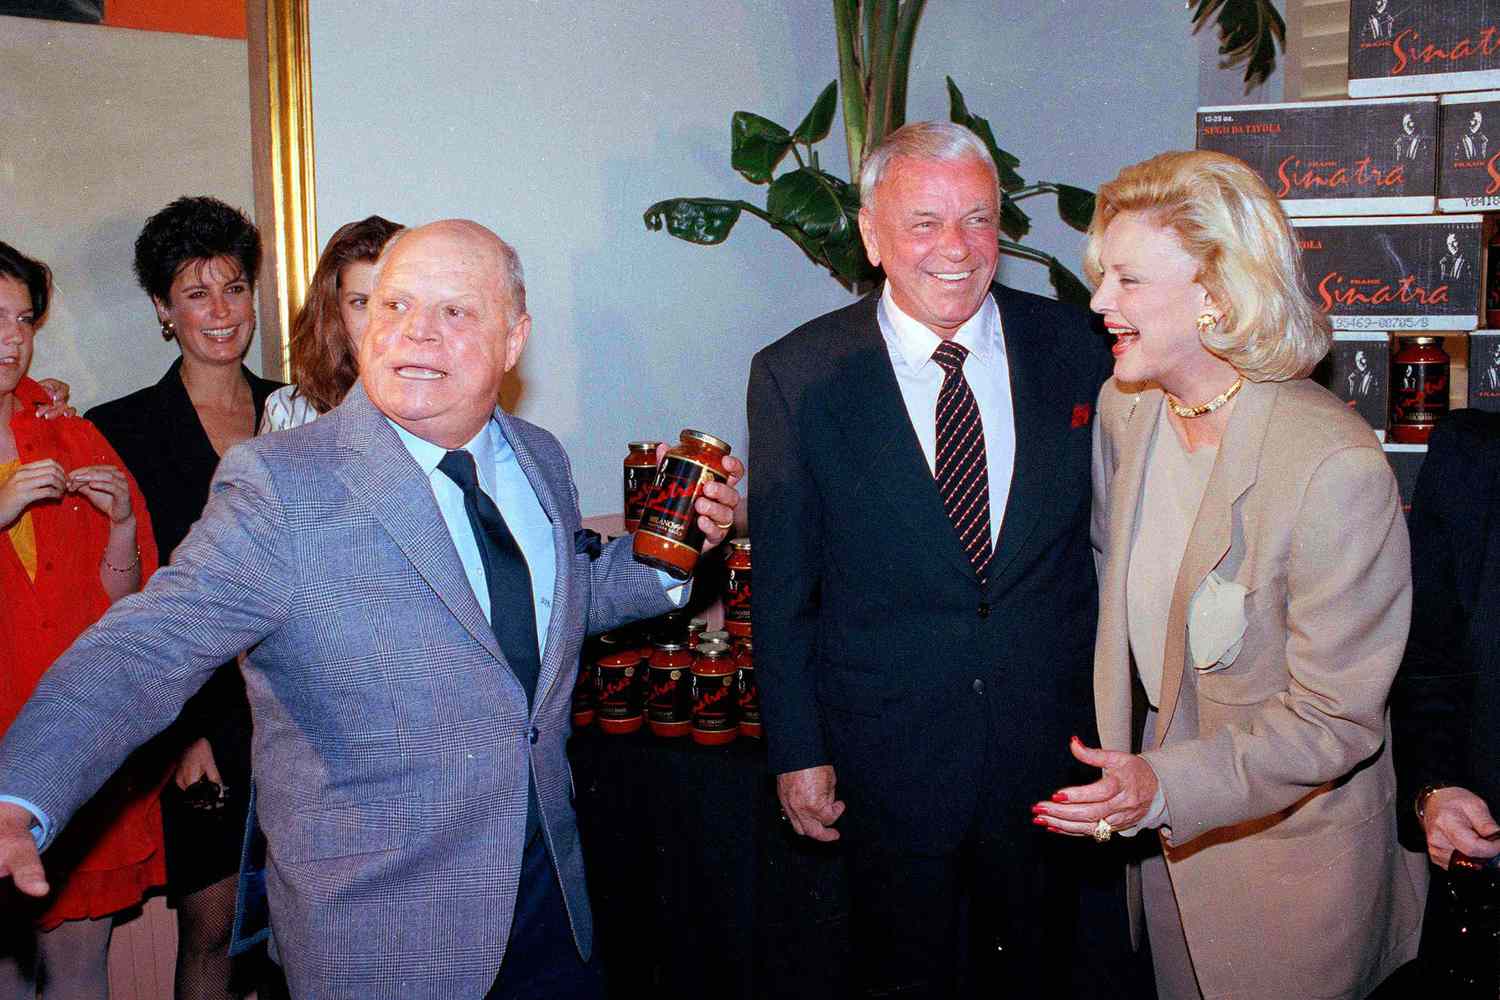 Don Rickles With&nbsp;Frank Sinatra&nbsp;and Barbara Sinatra in Los Angeles on&nbsp;May 22, 1990